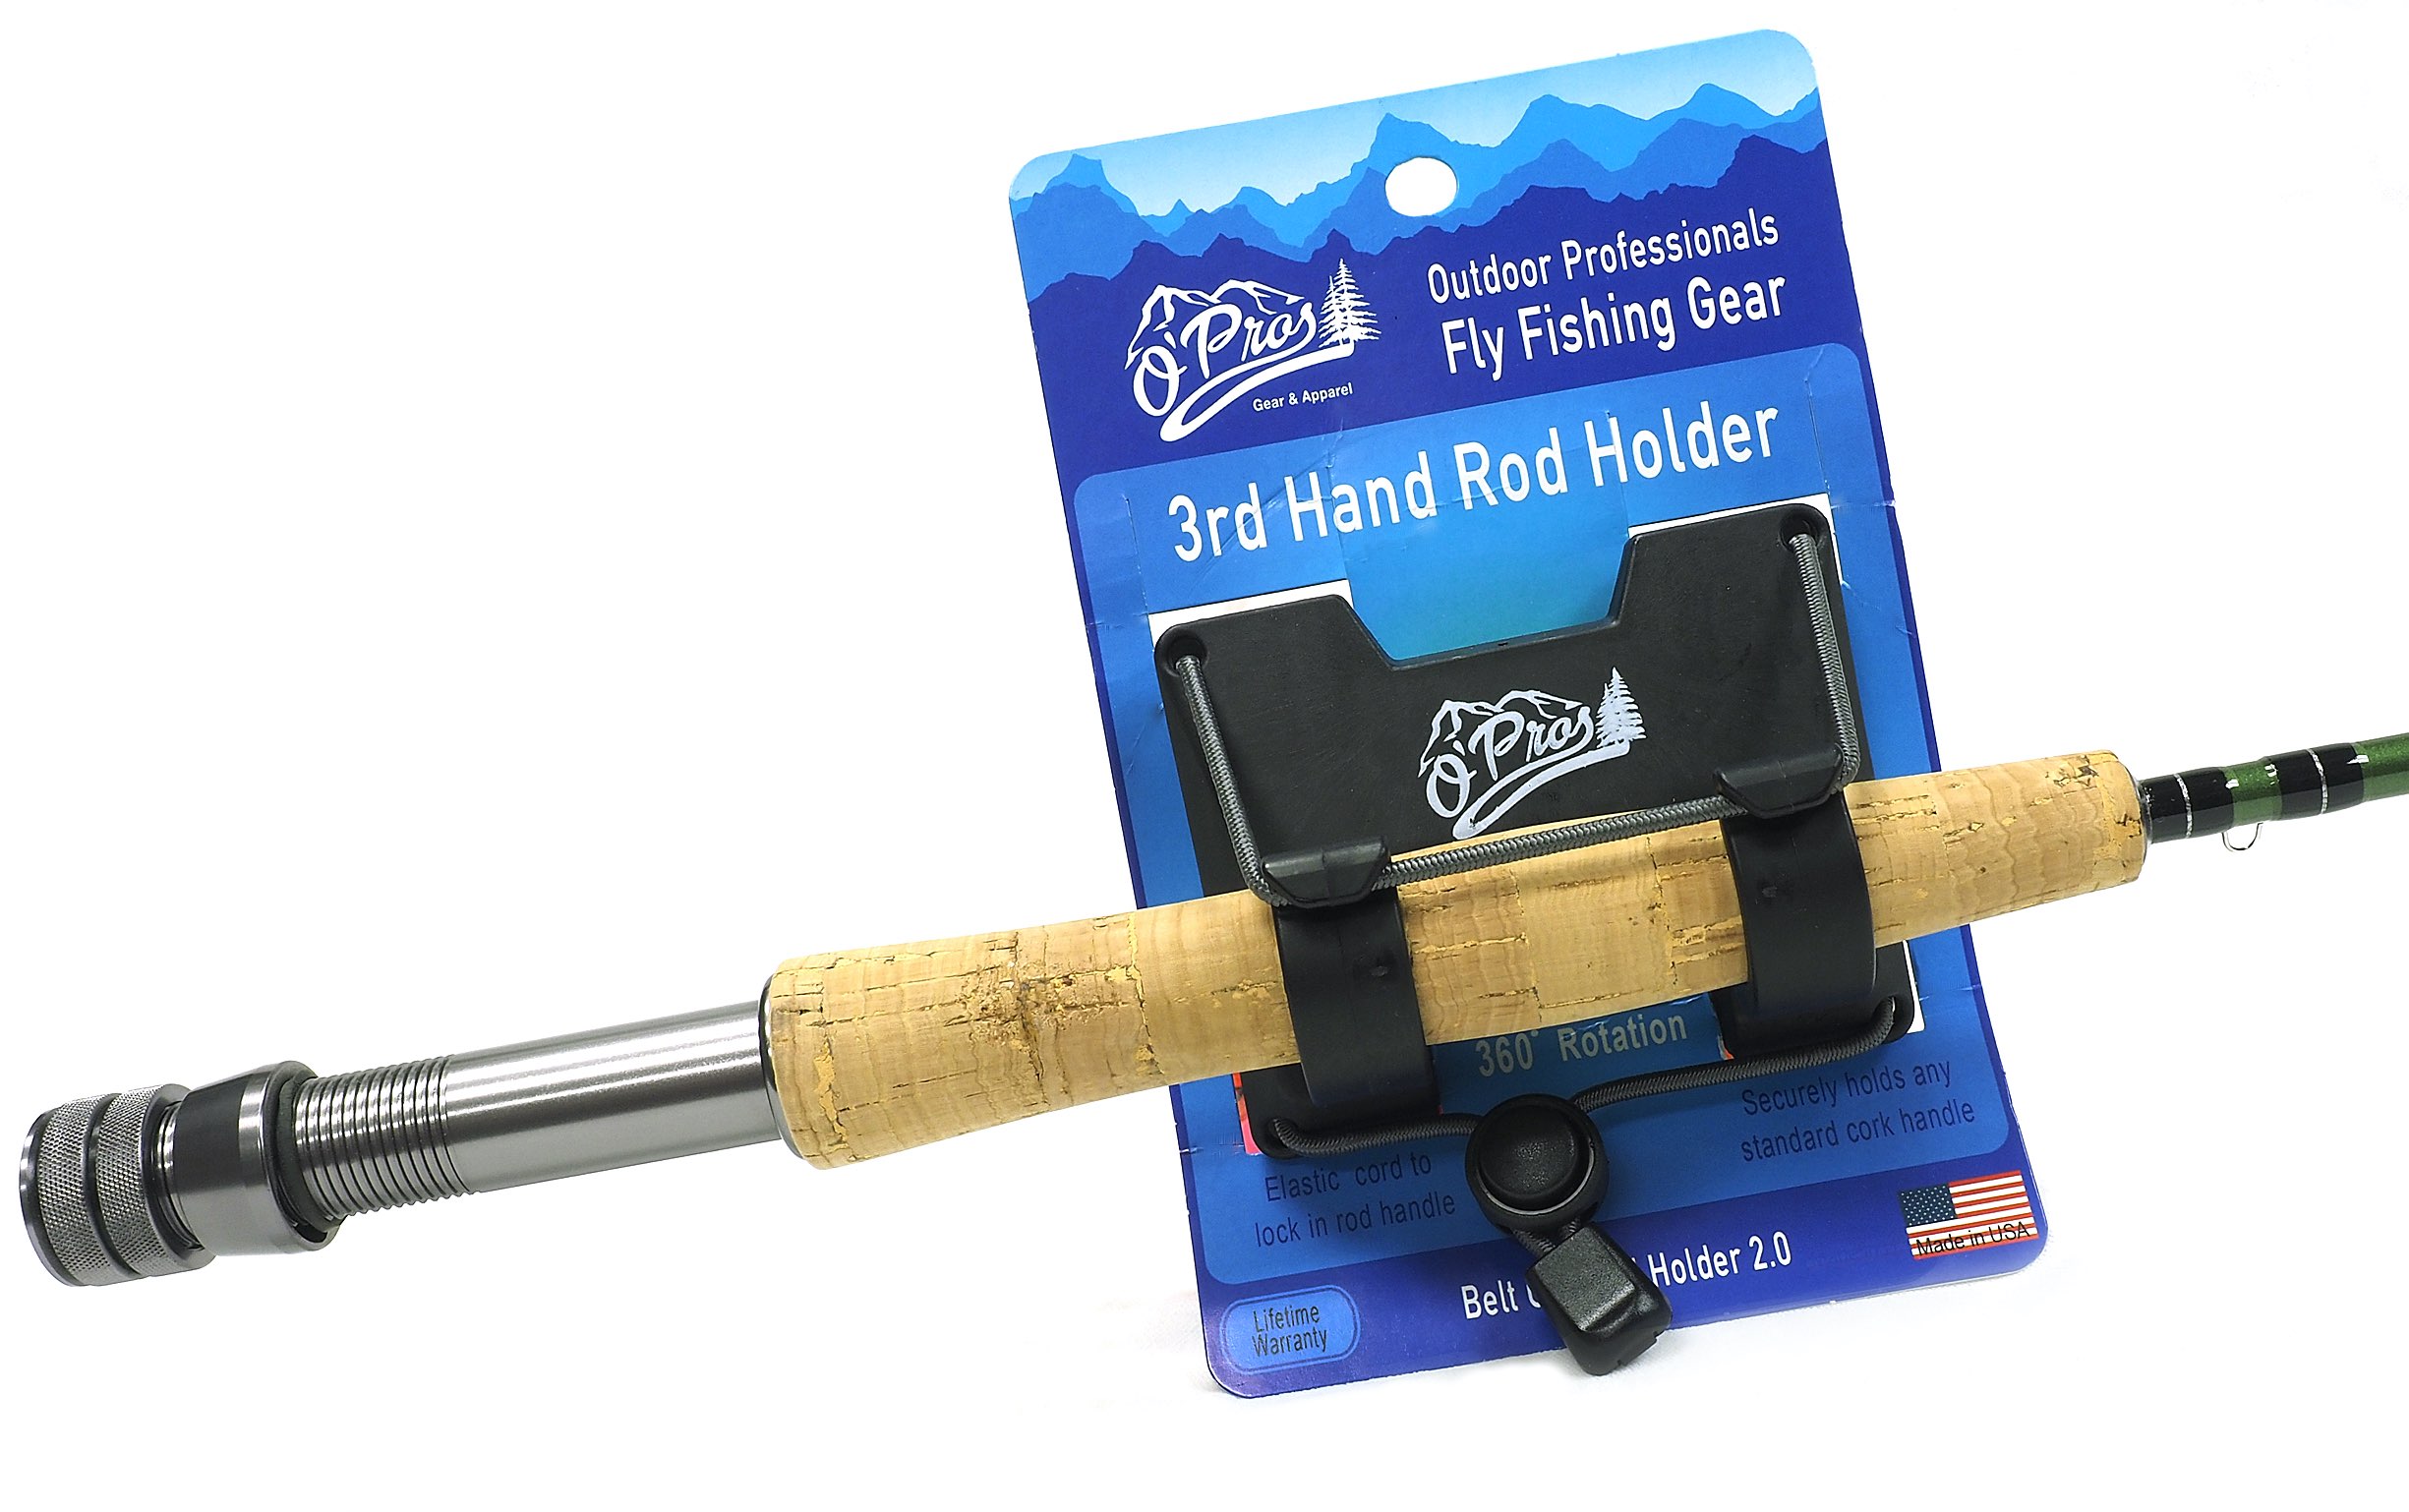 O'Pros Outdoor Professionals Fly Fishing Gear 3rd Hand Rod Holder - Hook,  Line and Sinker - Guelph's #1 Tackle Store O'Pros Outdoor Professionals Fly  Fishing Gear 3rd Hand Rod Holder